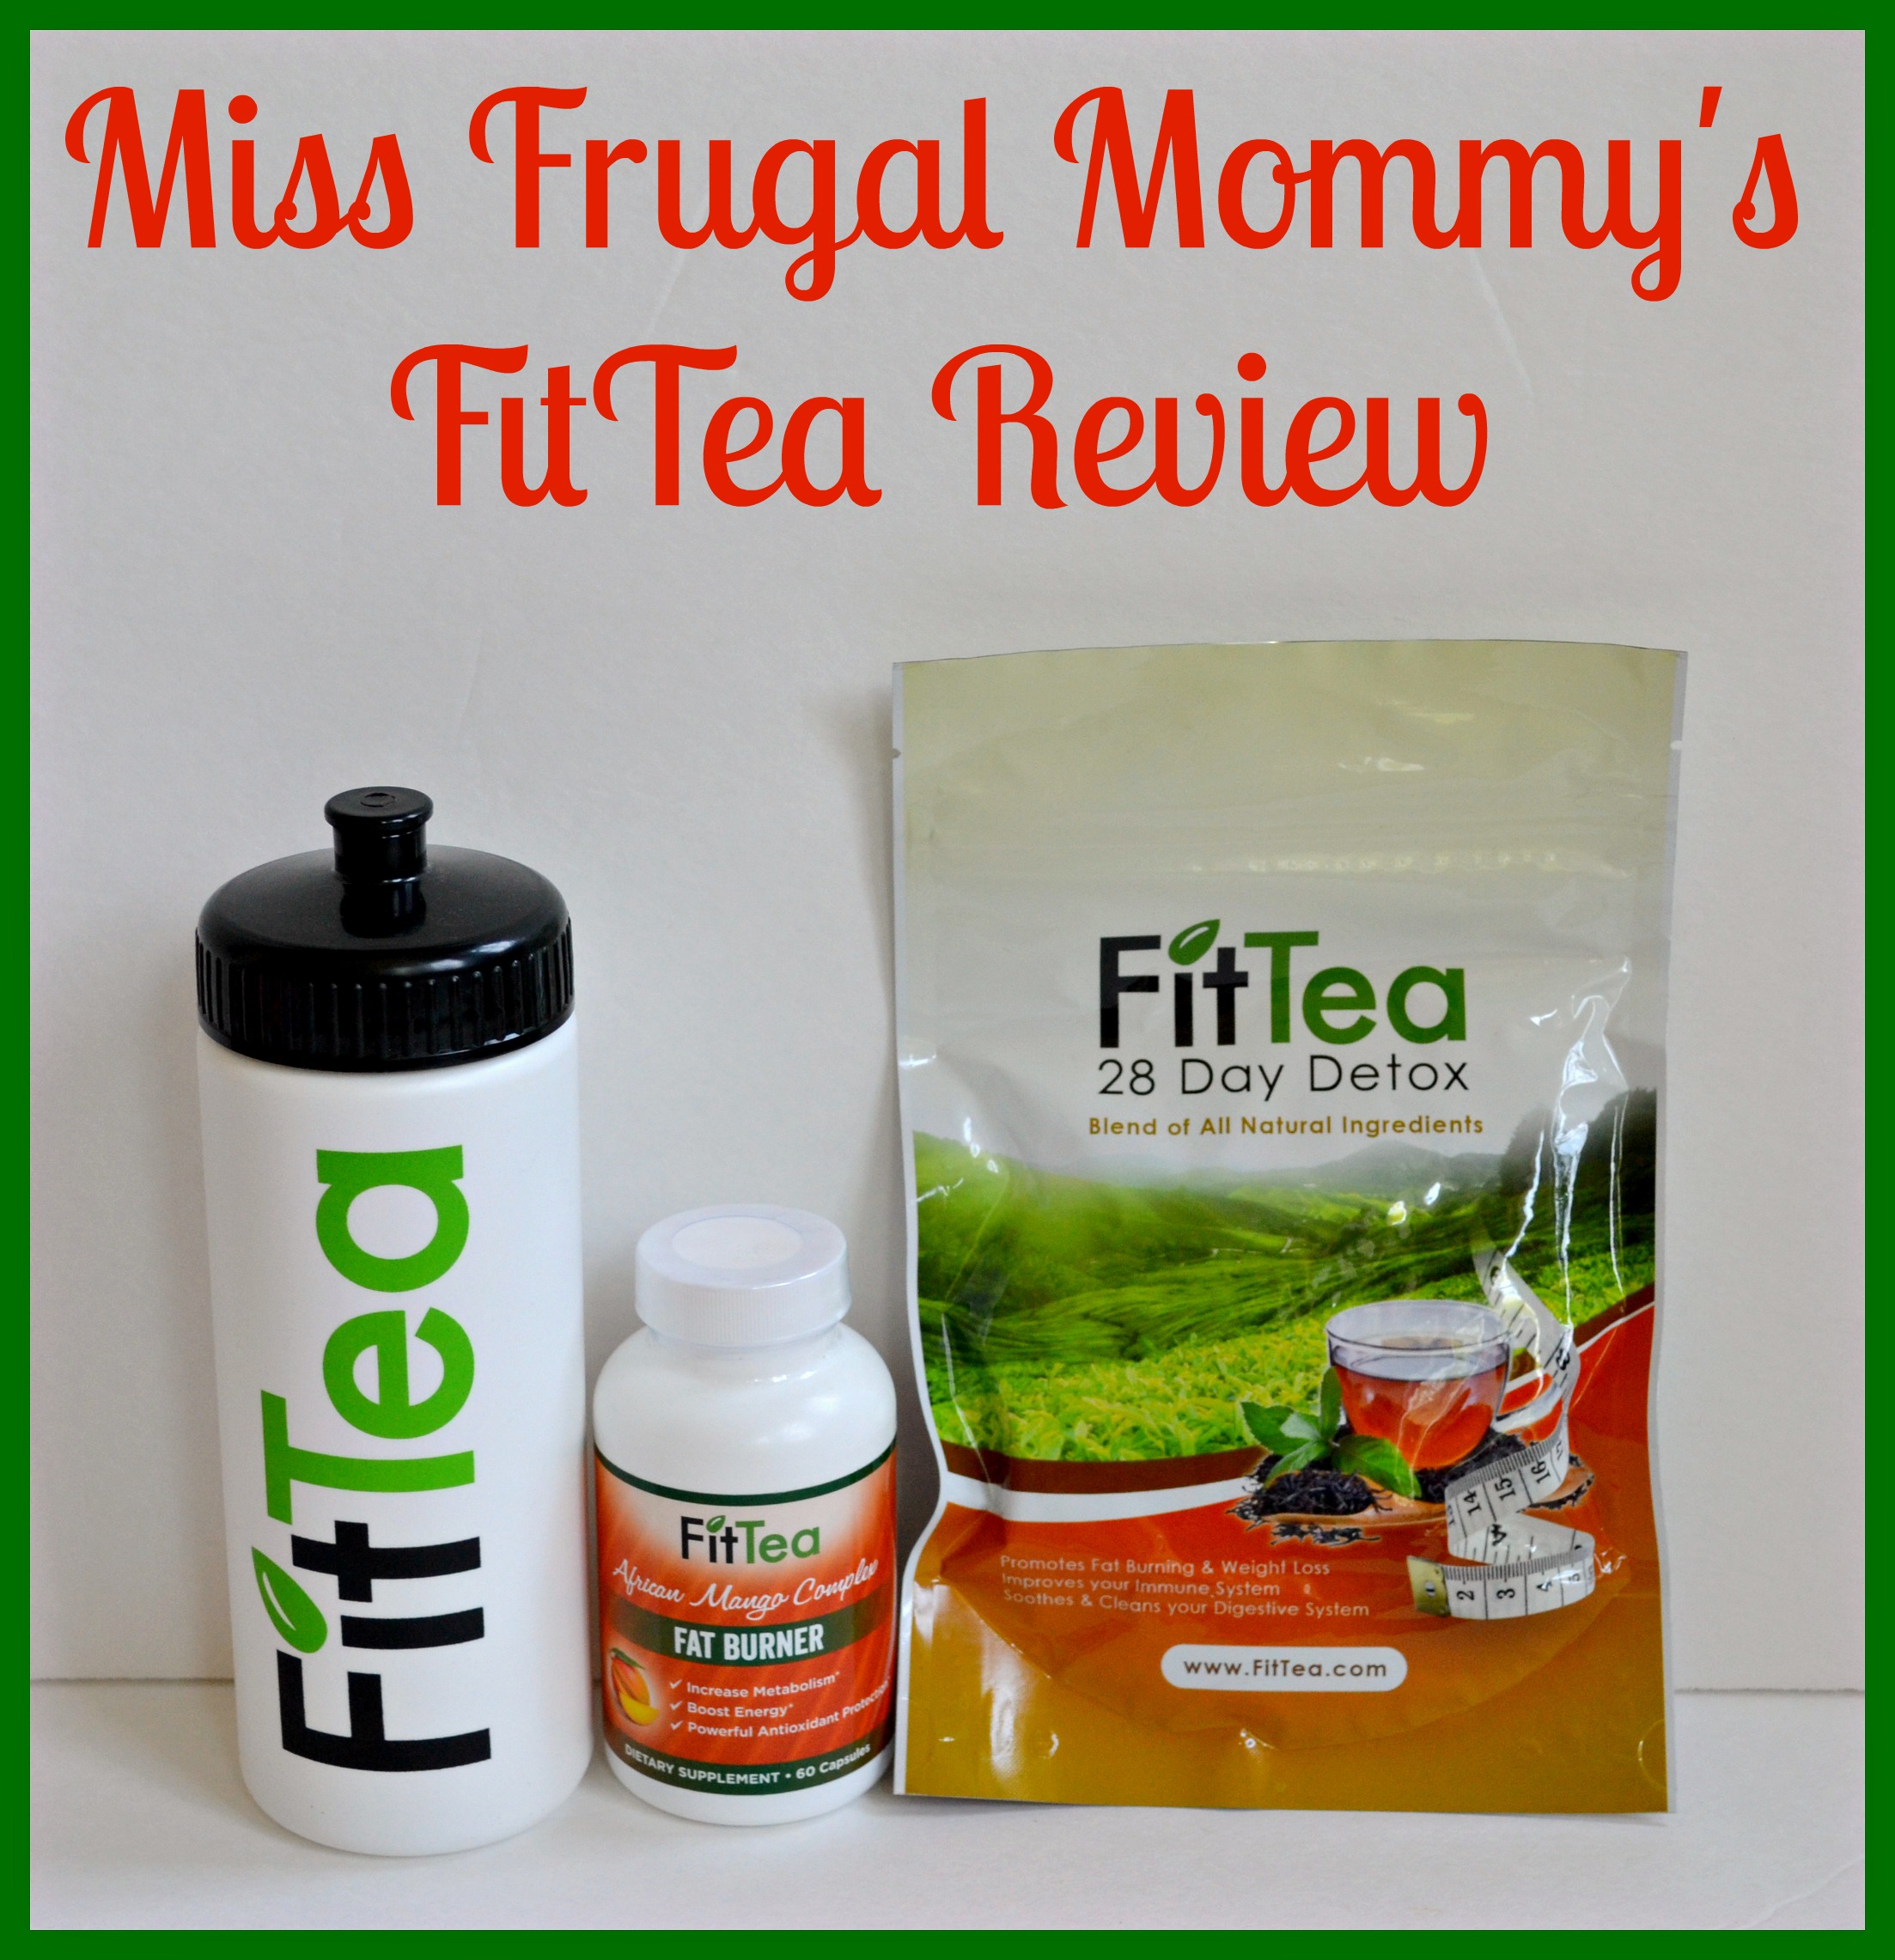 FitTea Review